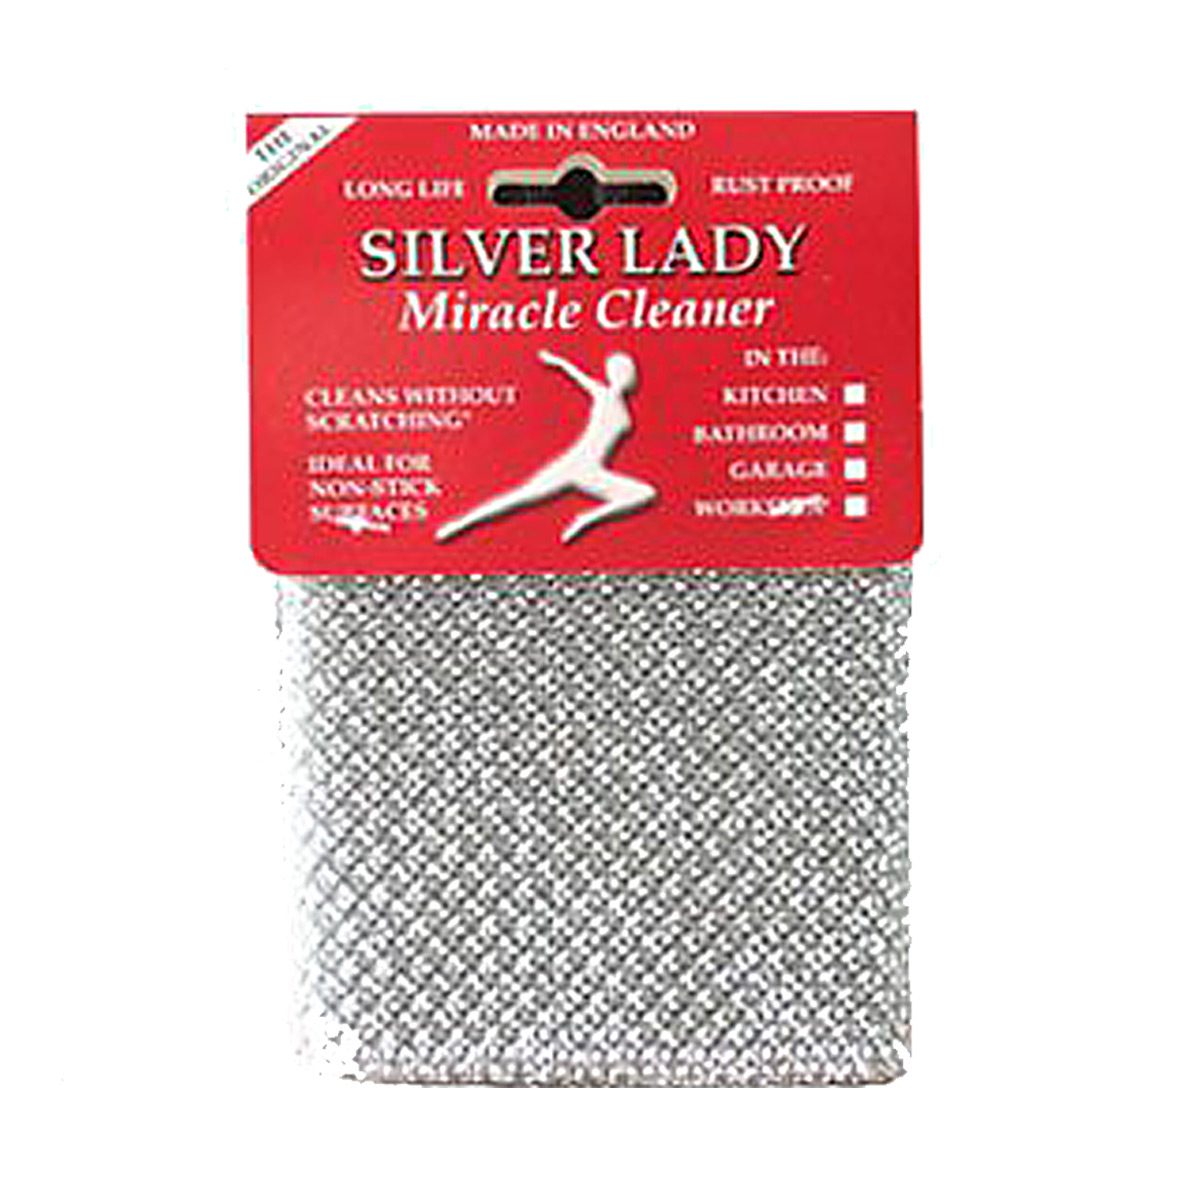 cleaning-equipment-cloths-scourers-wipes-silver-lady-miracle-cleaner-vjs-distributors-SILVER